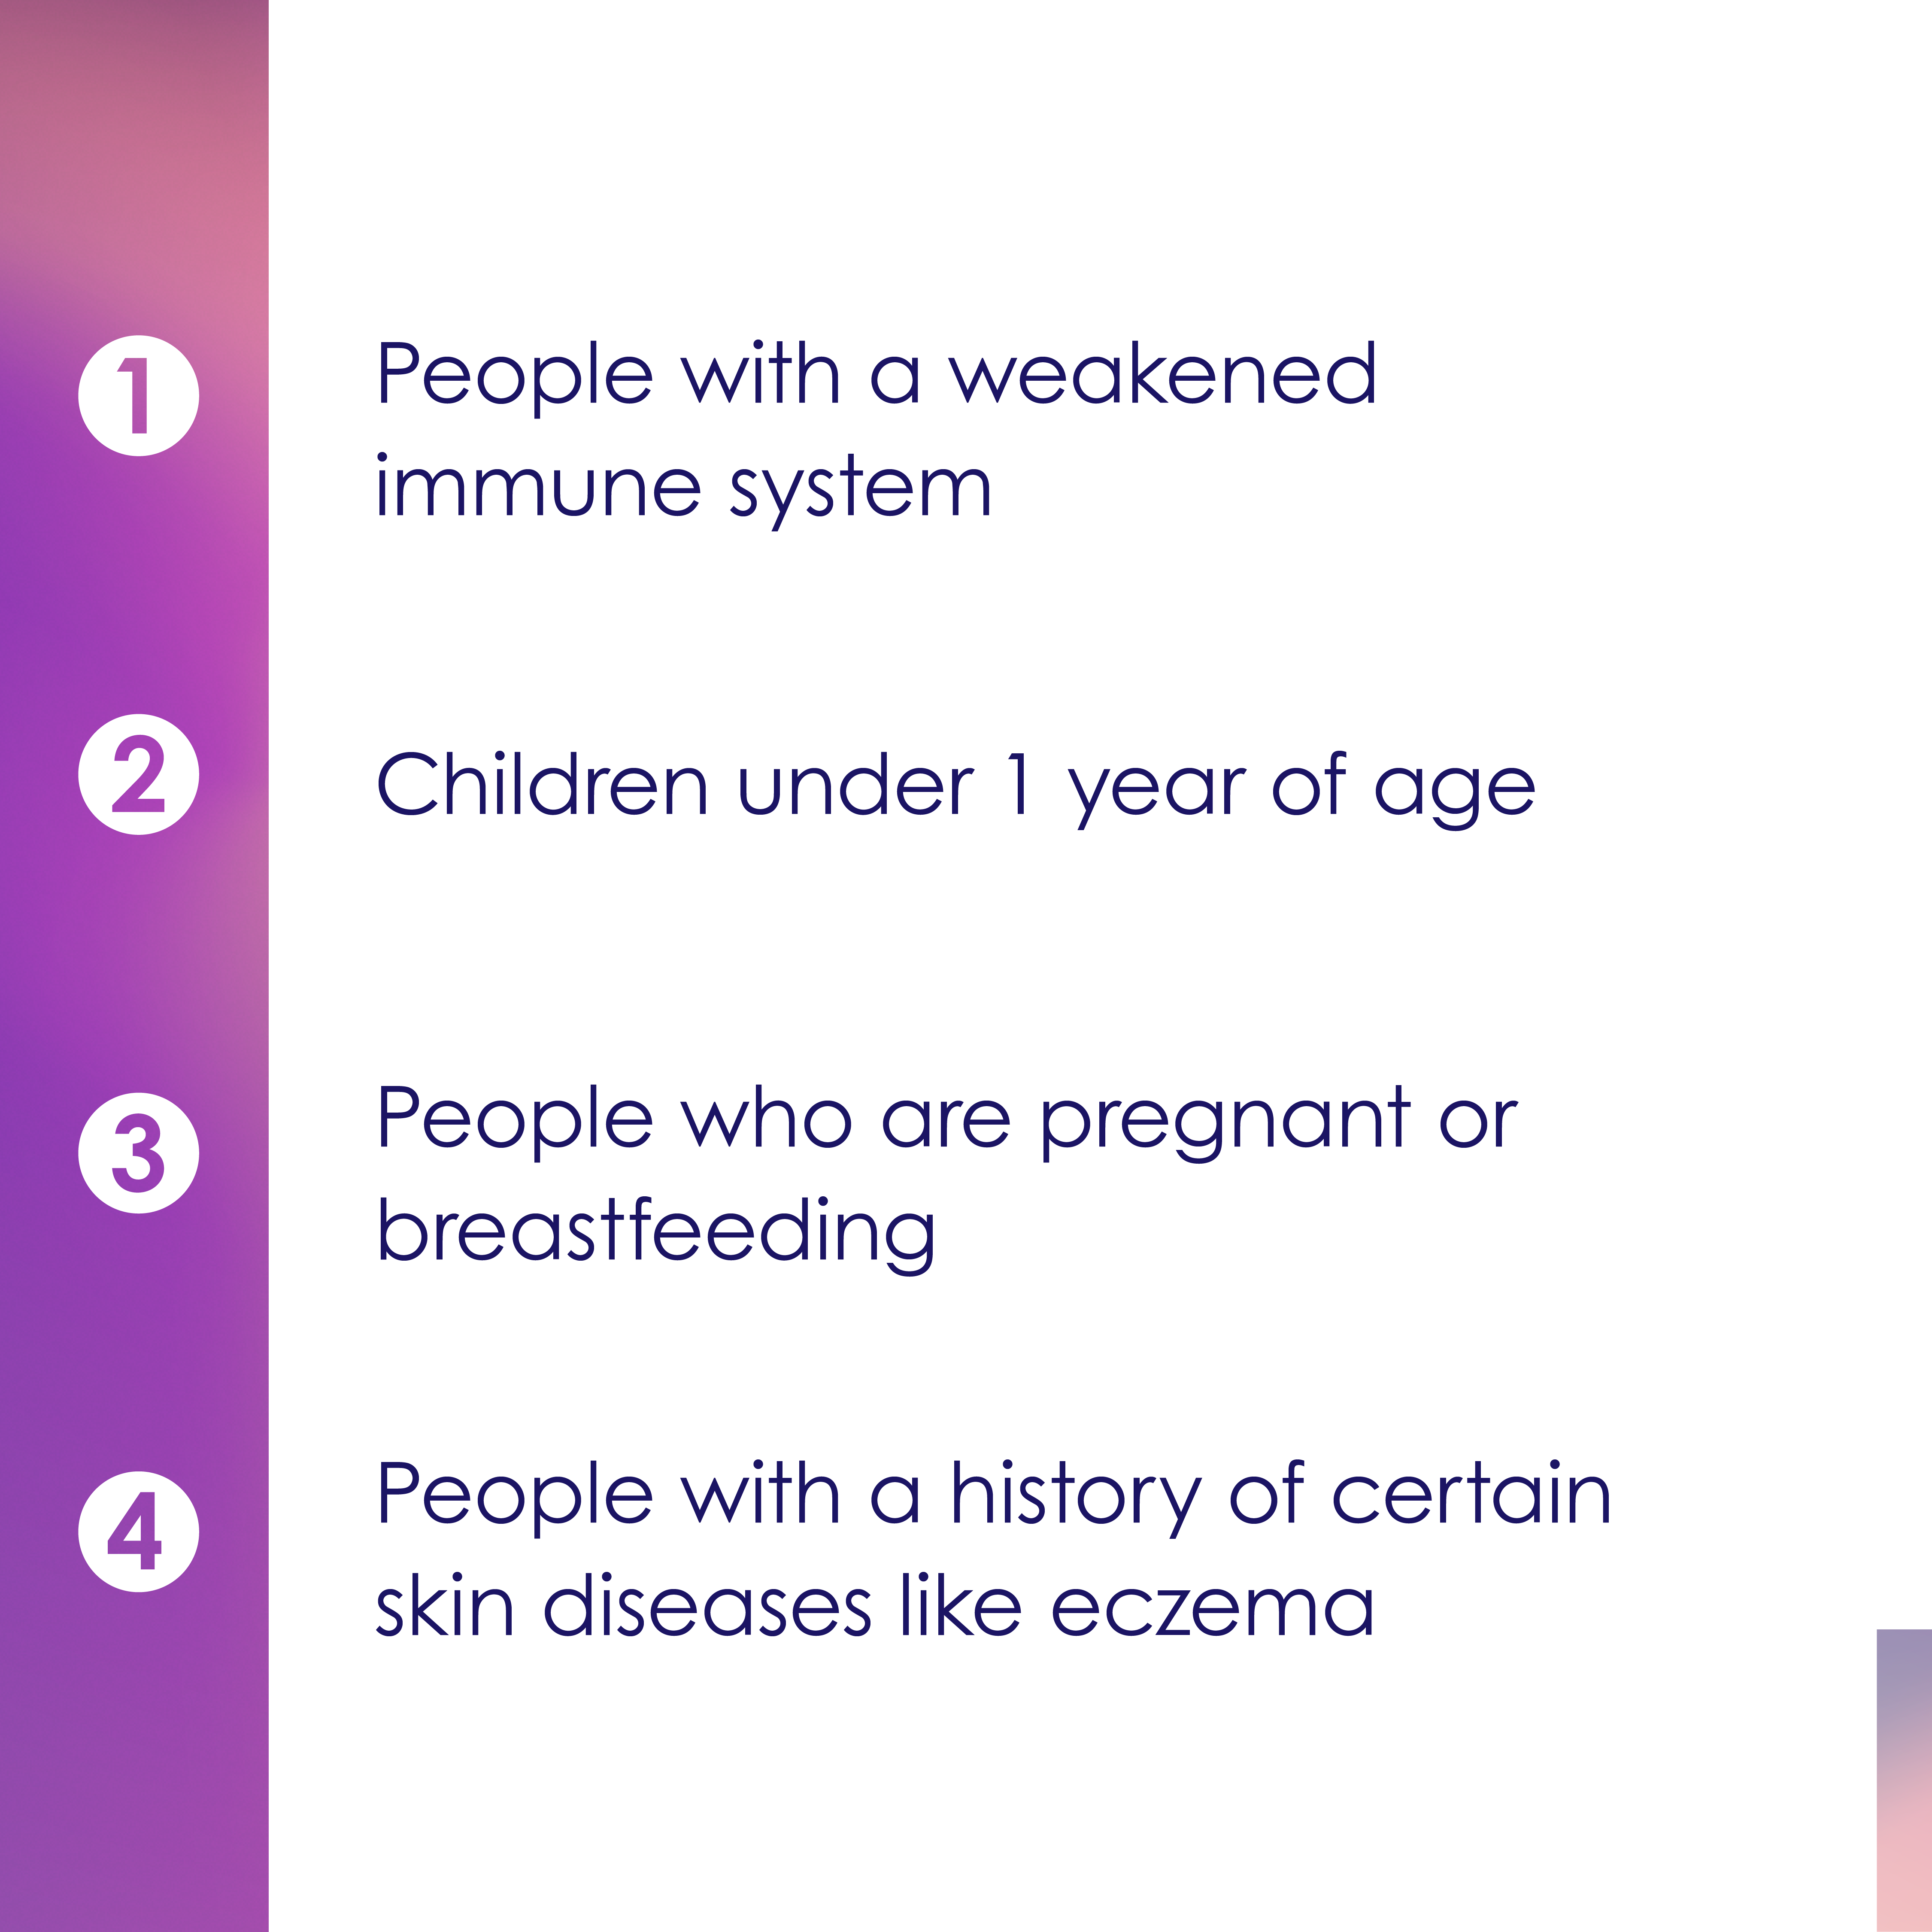 People with a weekend immune system. Children (particularly under 9 years old). People who are pregnant or breatfeeding